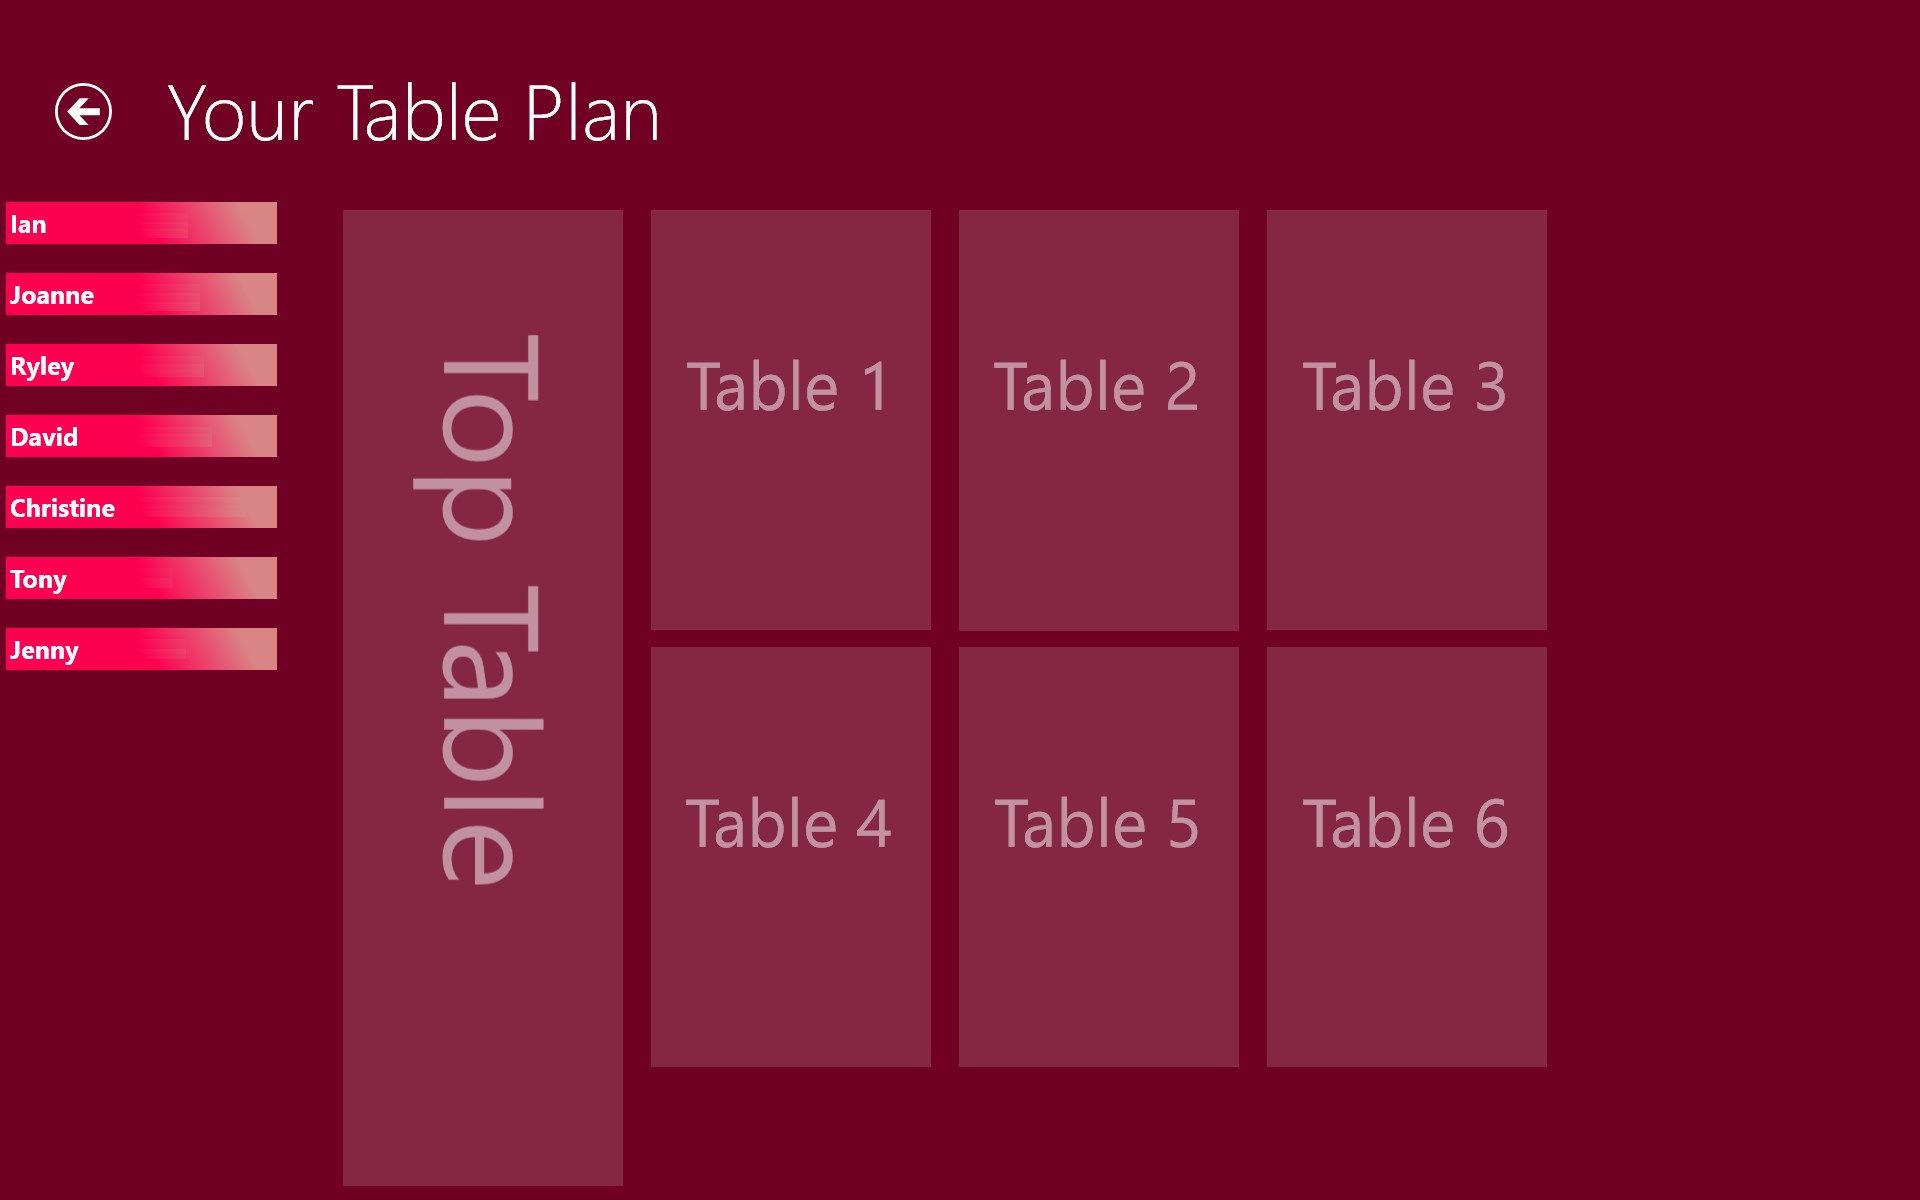 The table plan